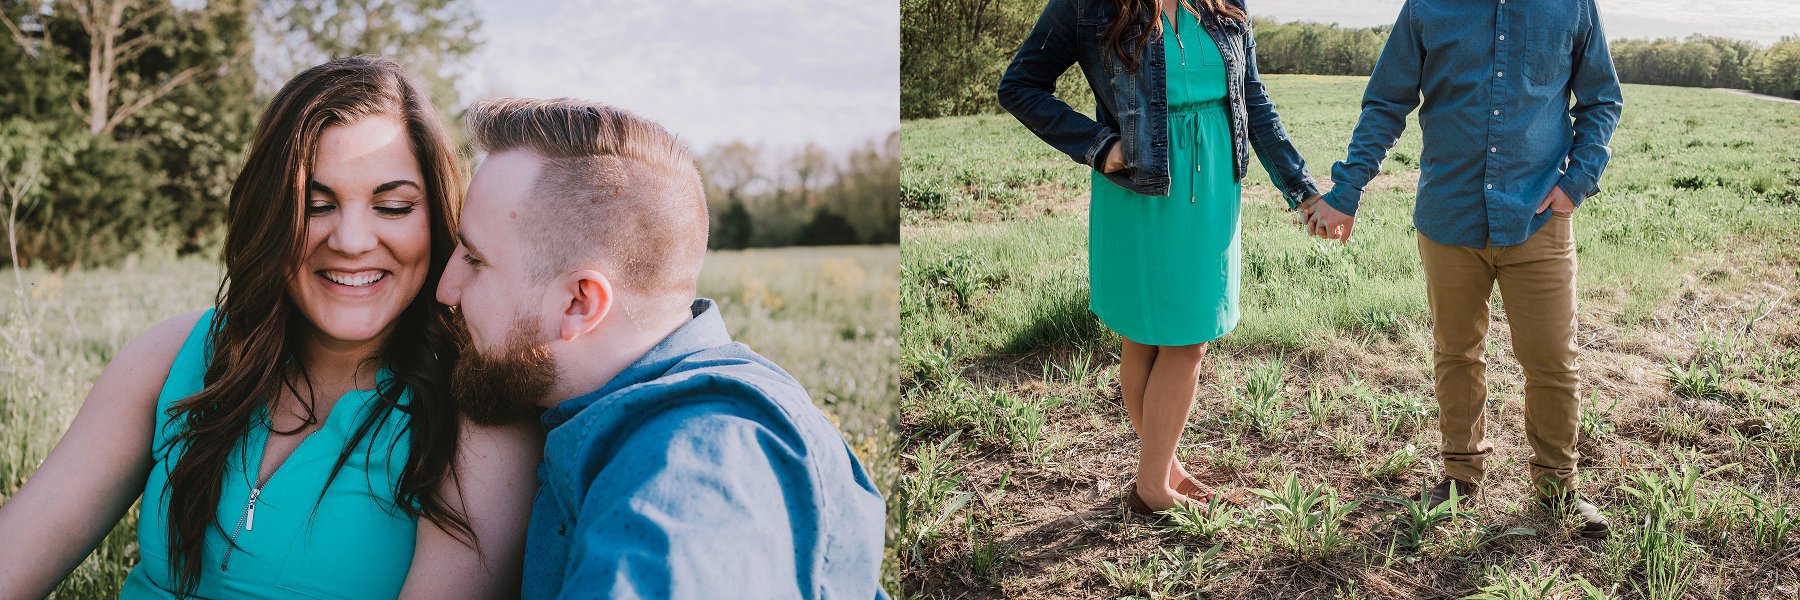 Spring Engagement Photography in Kansas City by Merry Ohler 4